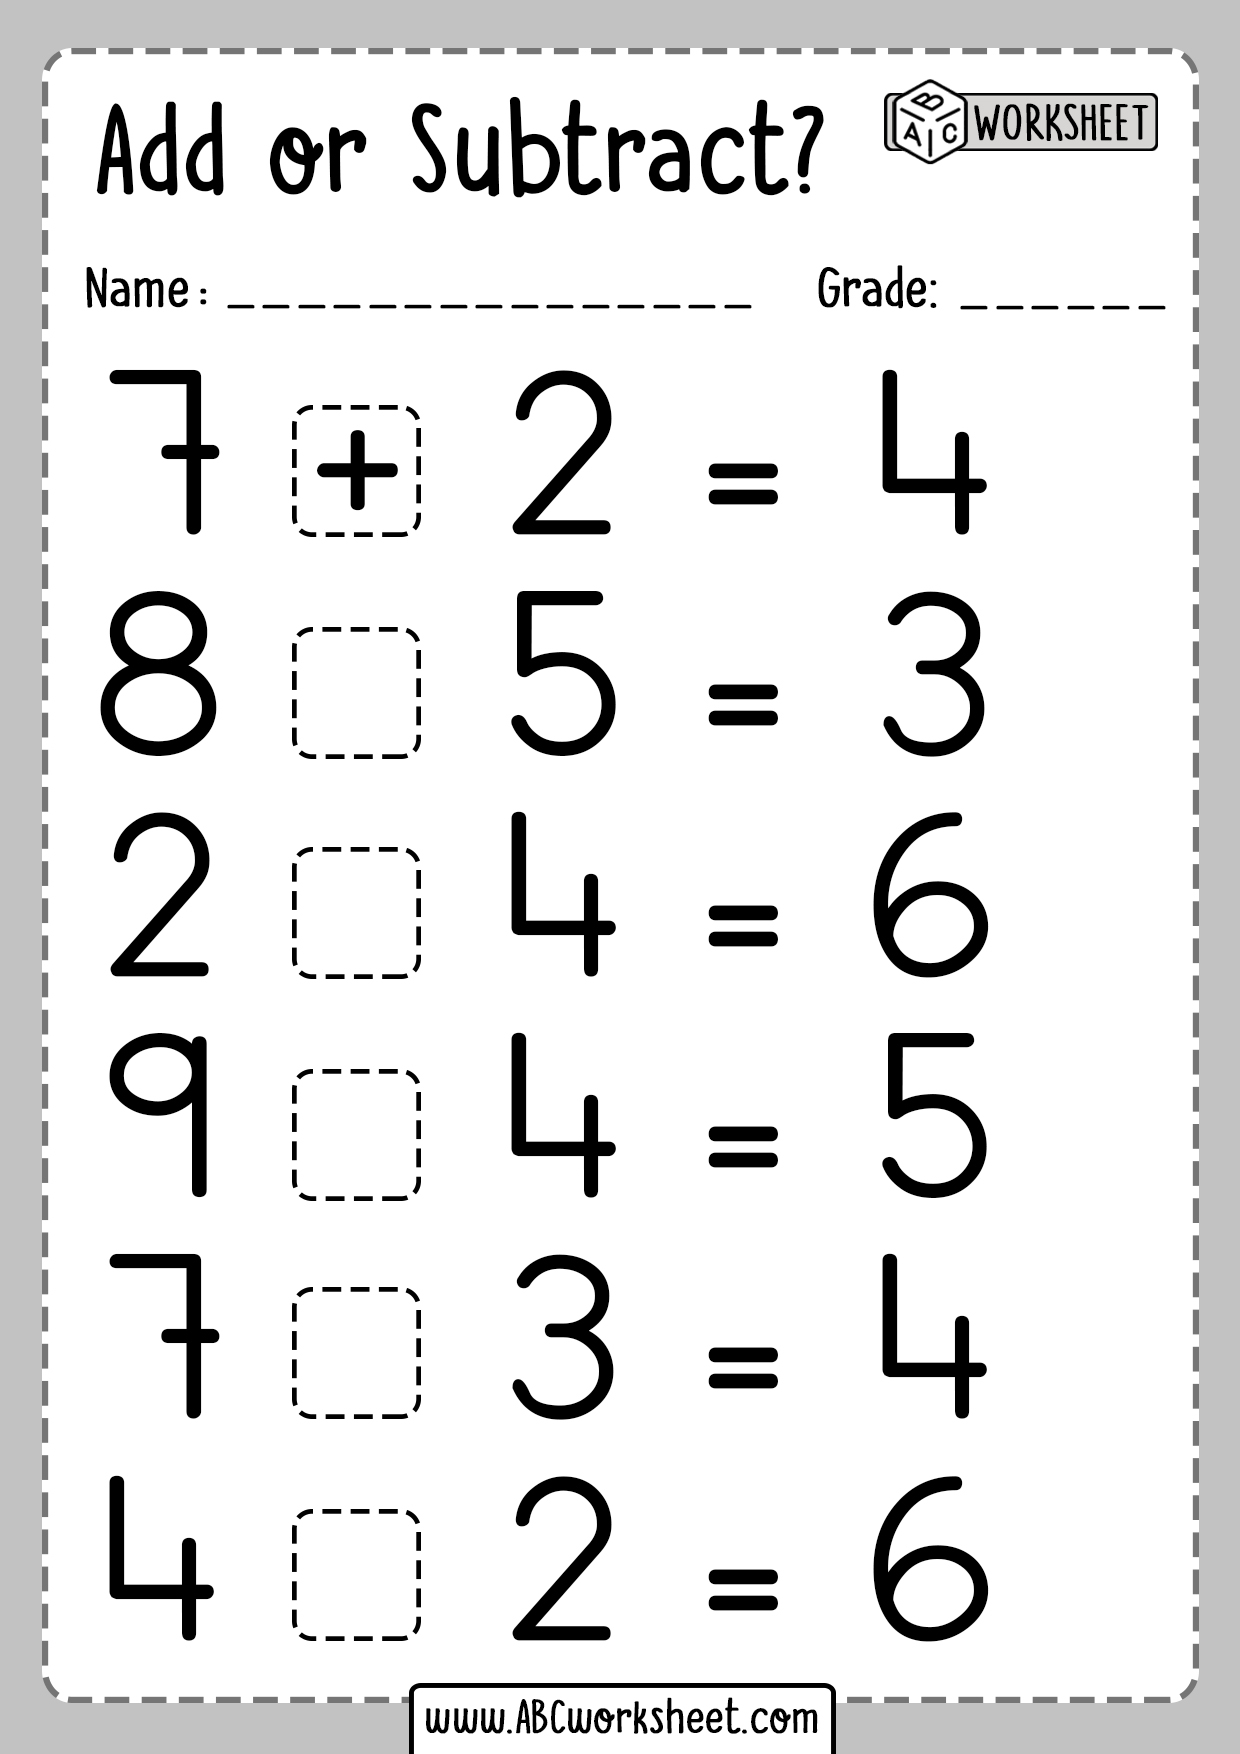 addition-and-subtraction-worksheets-for-kindergarten-17-sample-addition-subtraction-worksheets